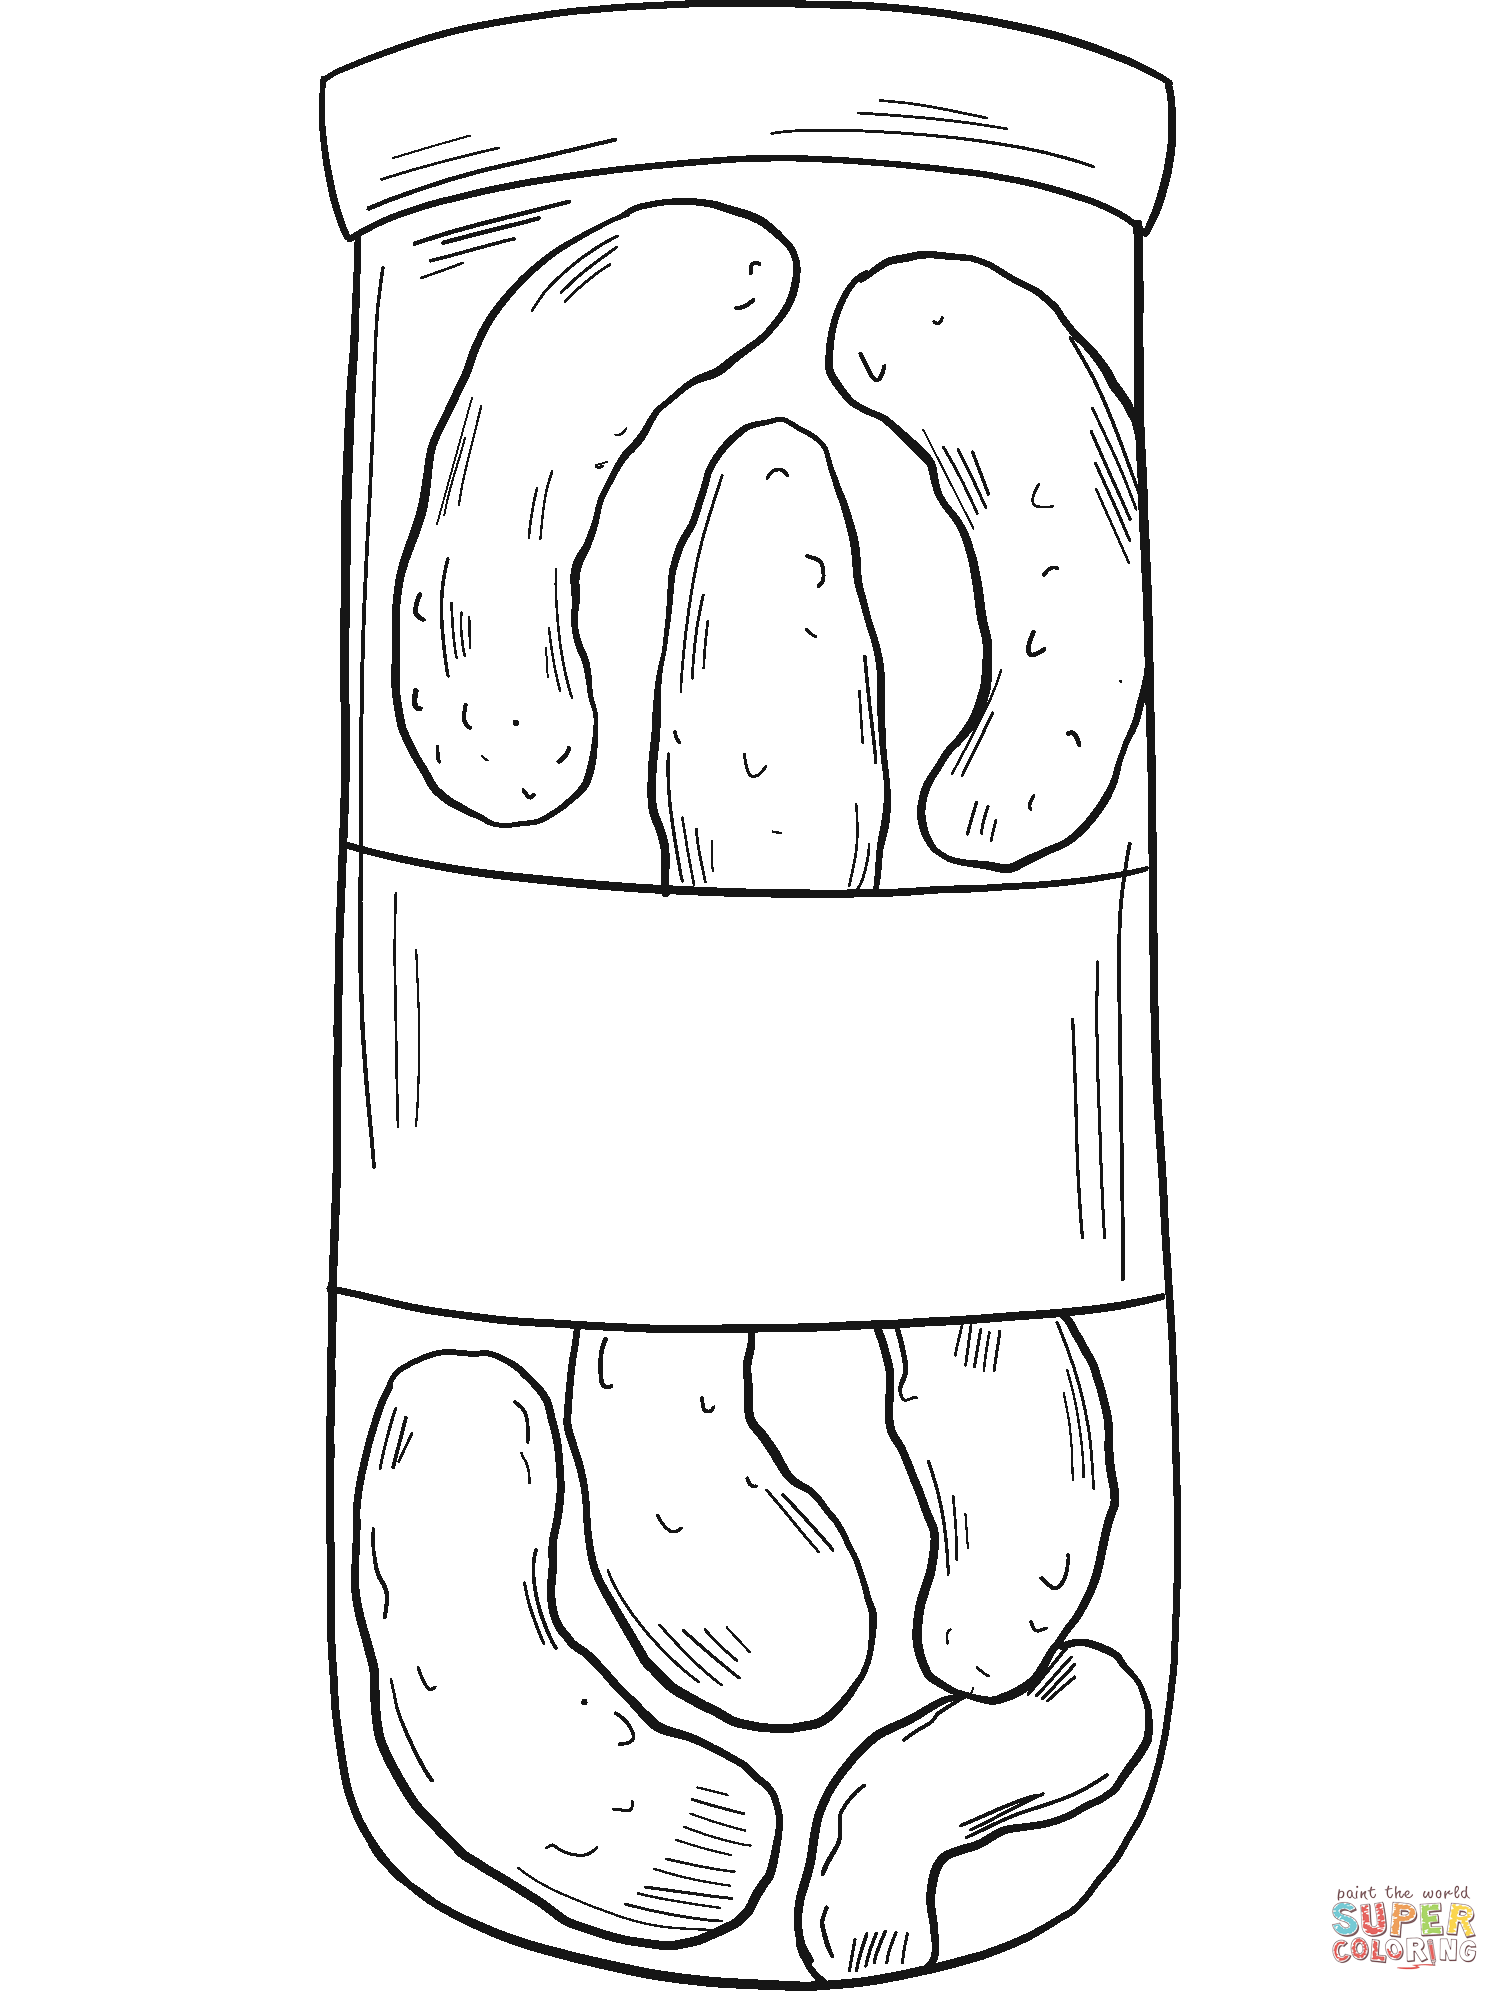 pickle slice coloring page